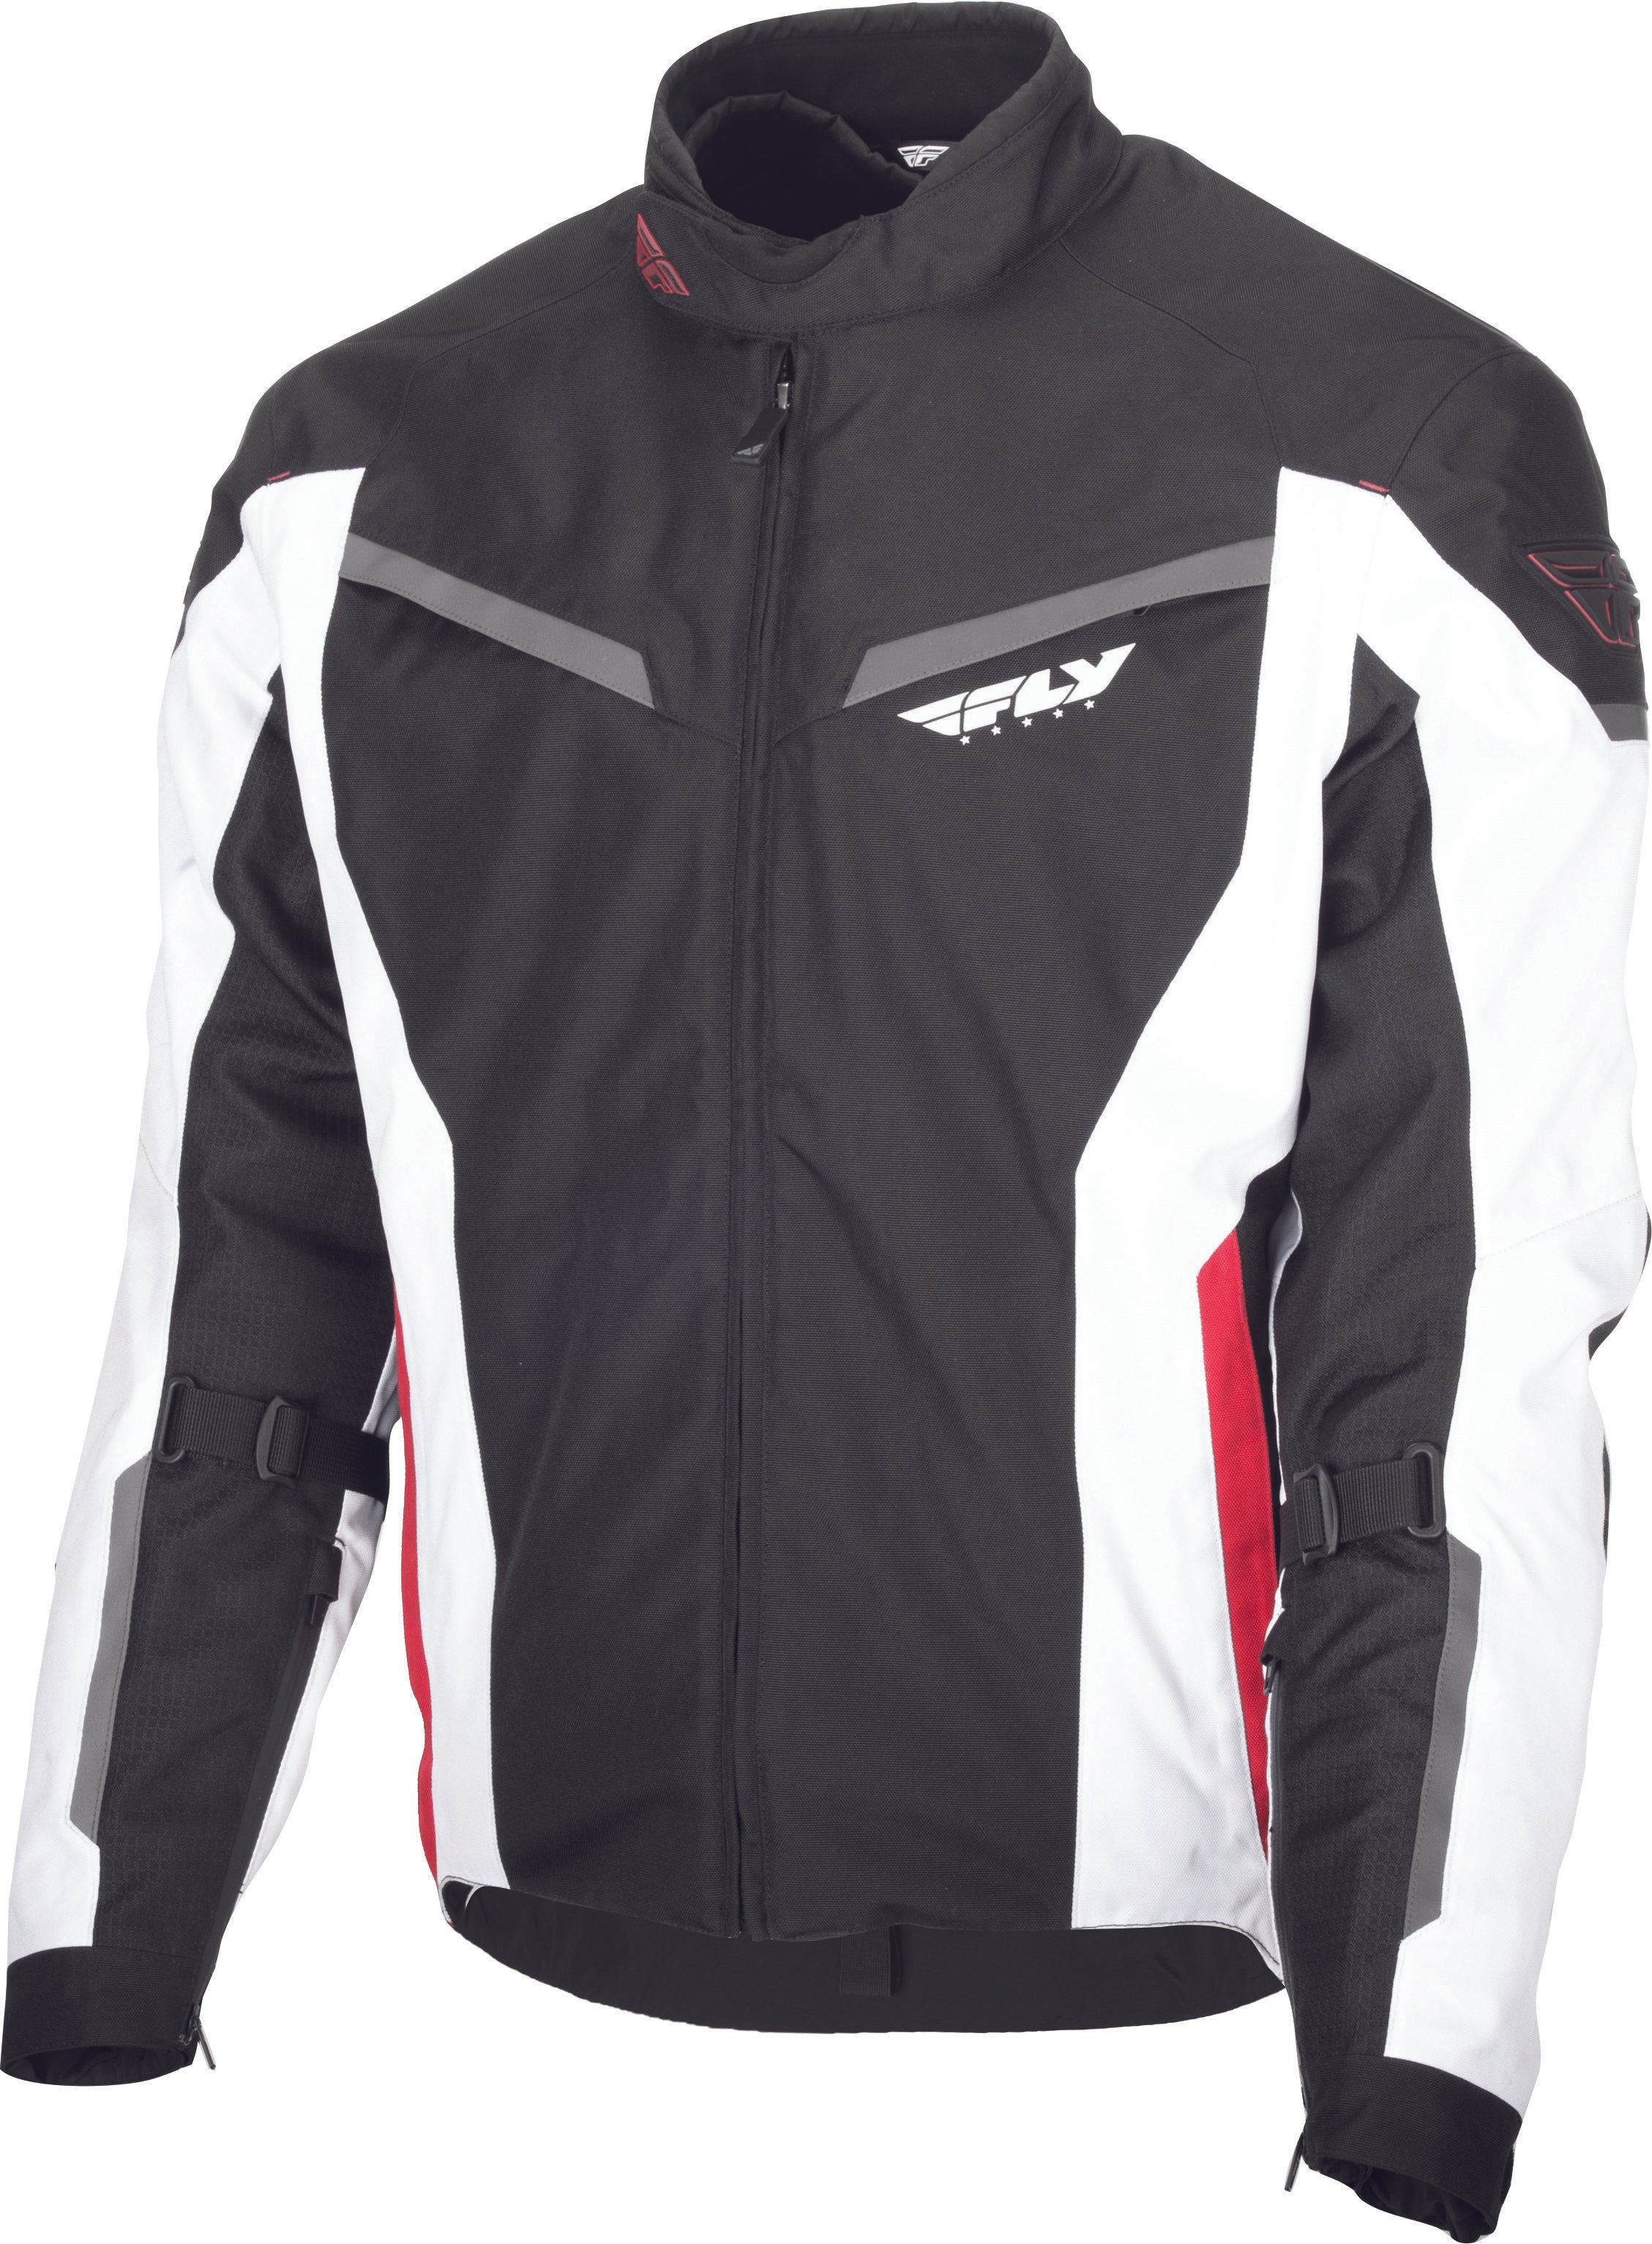 Fly Racing Strata Jacket Black/White/Red 4X-Large 477-2101-8